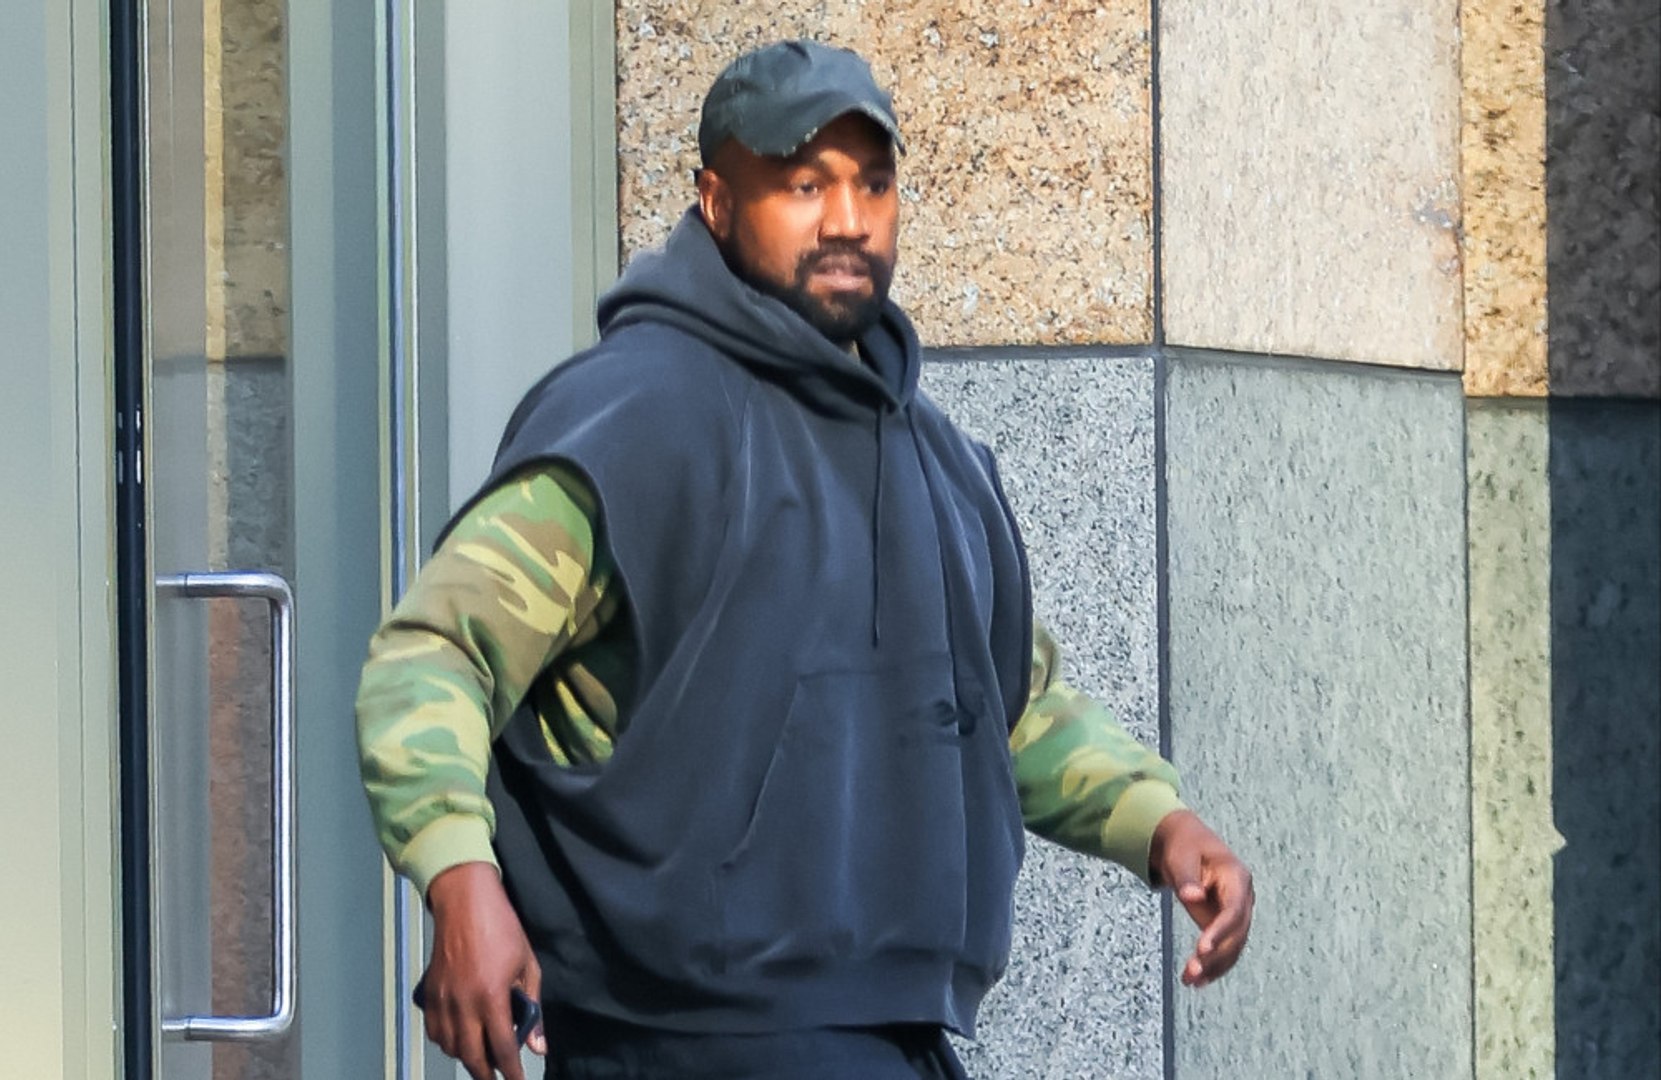 Kanye West's decision to wear a 'White Lives Matter' t-shirt stemmed from a 'con